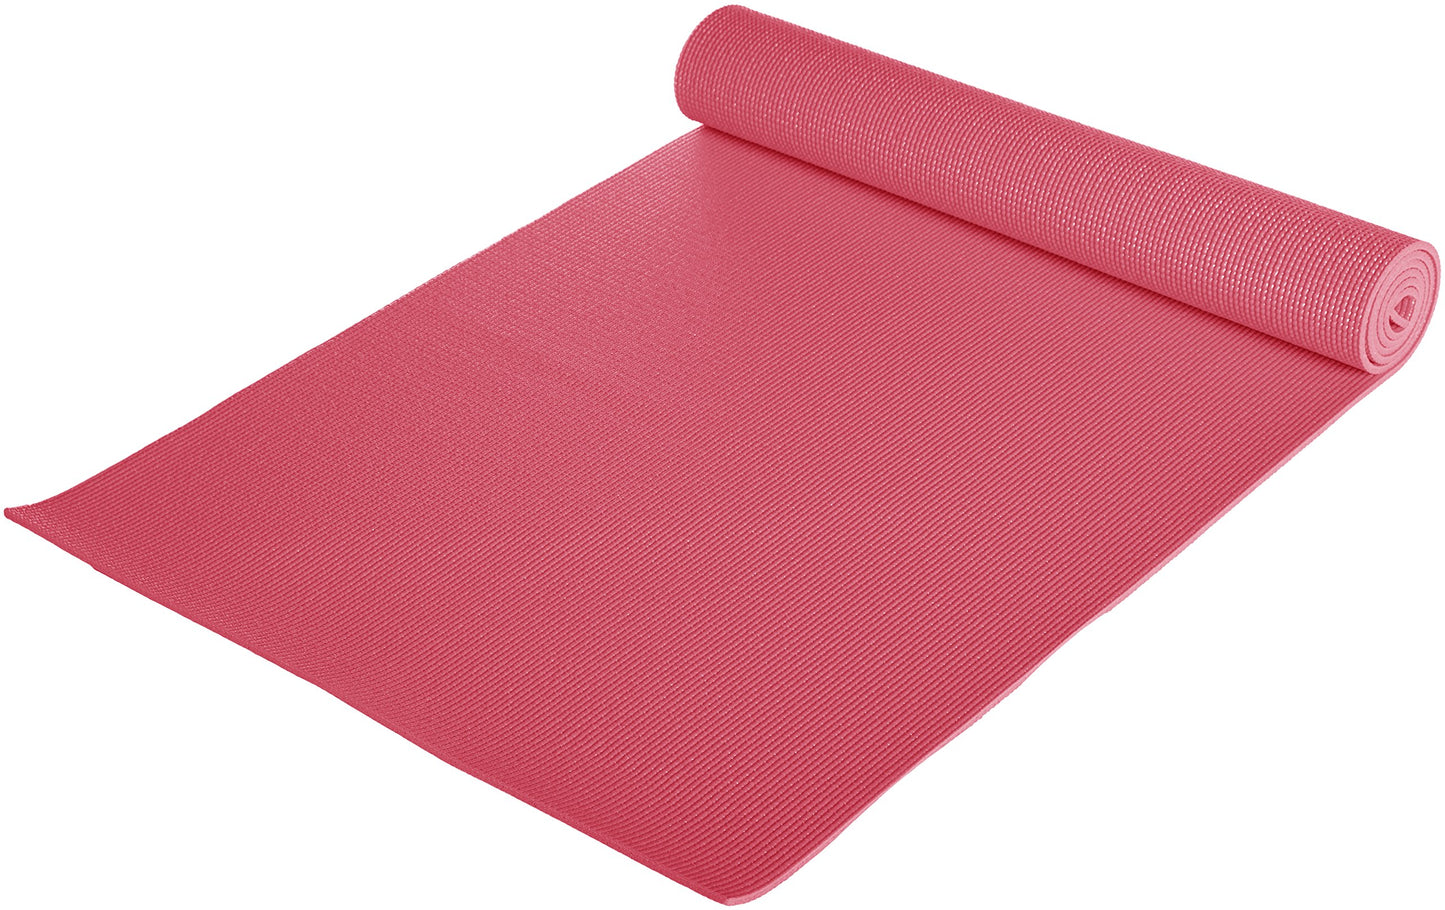 AmazonBasics Yoga and Exercise Mat with Carrying Strap, 6mm - Gymom Wellness Warehouse 